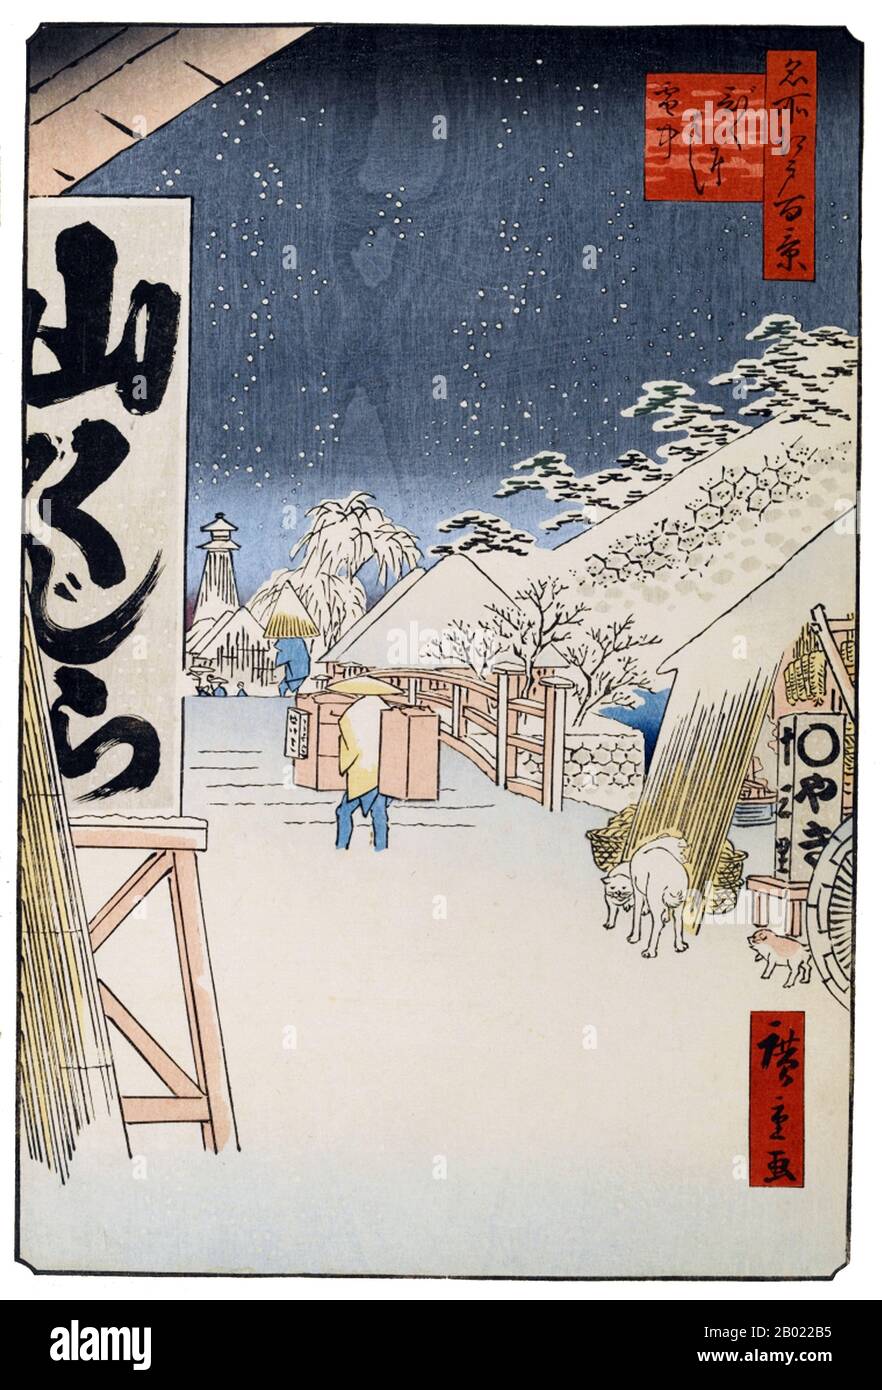 Hiroshige's One Hundred Famous Views of Edo (名所江戸百景), actually composed of 118 woodblock landscape and genre scenes of mid-19th century Tokyo, is one of the greatest achievements of Japanese art. The series includes many of Hiroshige's most famous prints. It represents a celebration of the style and world of Japan's finest cultural flowering at the end of the Tokugawa Shogunate.  The winter group, numbers 99 through 118, begins with a scene of Kinryūzan Temple at Akasaka, with a red-on-white color scheme that is reserved for propitious occasions. Snow immediately signals the season and is depi Stock Photo